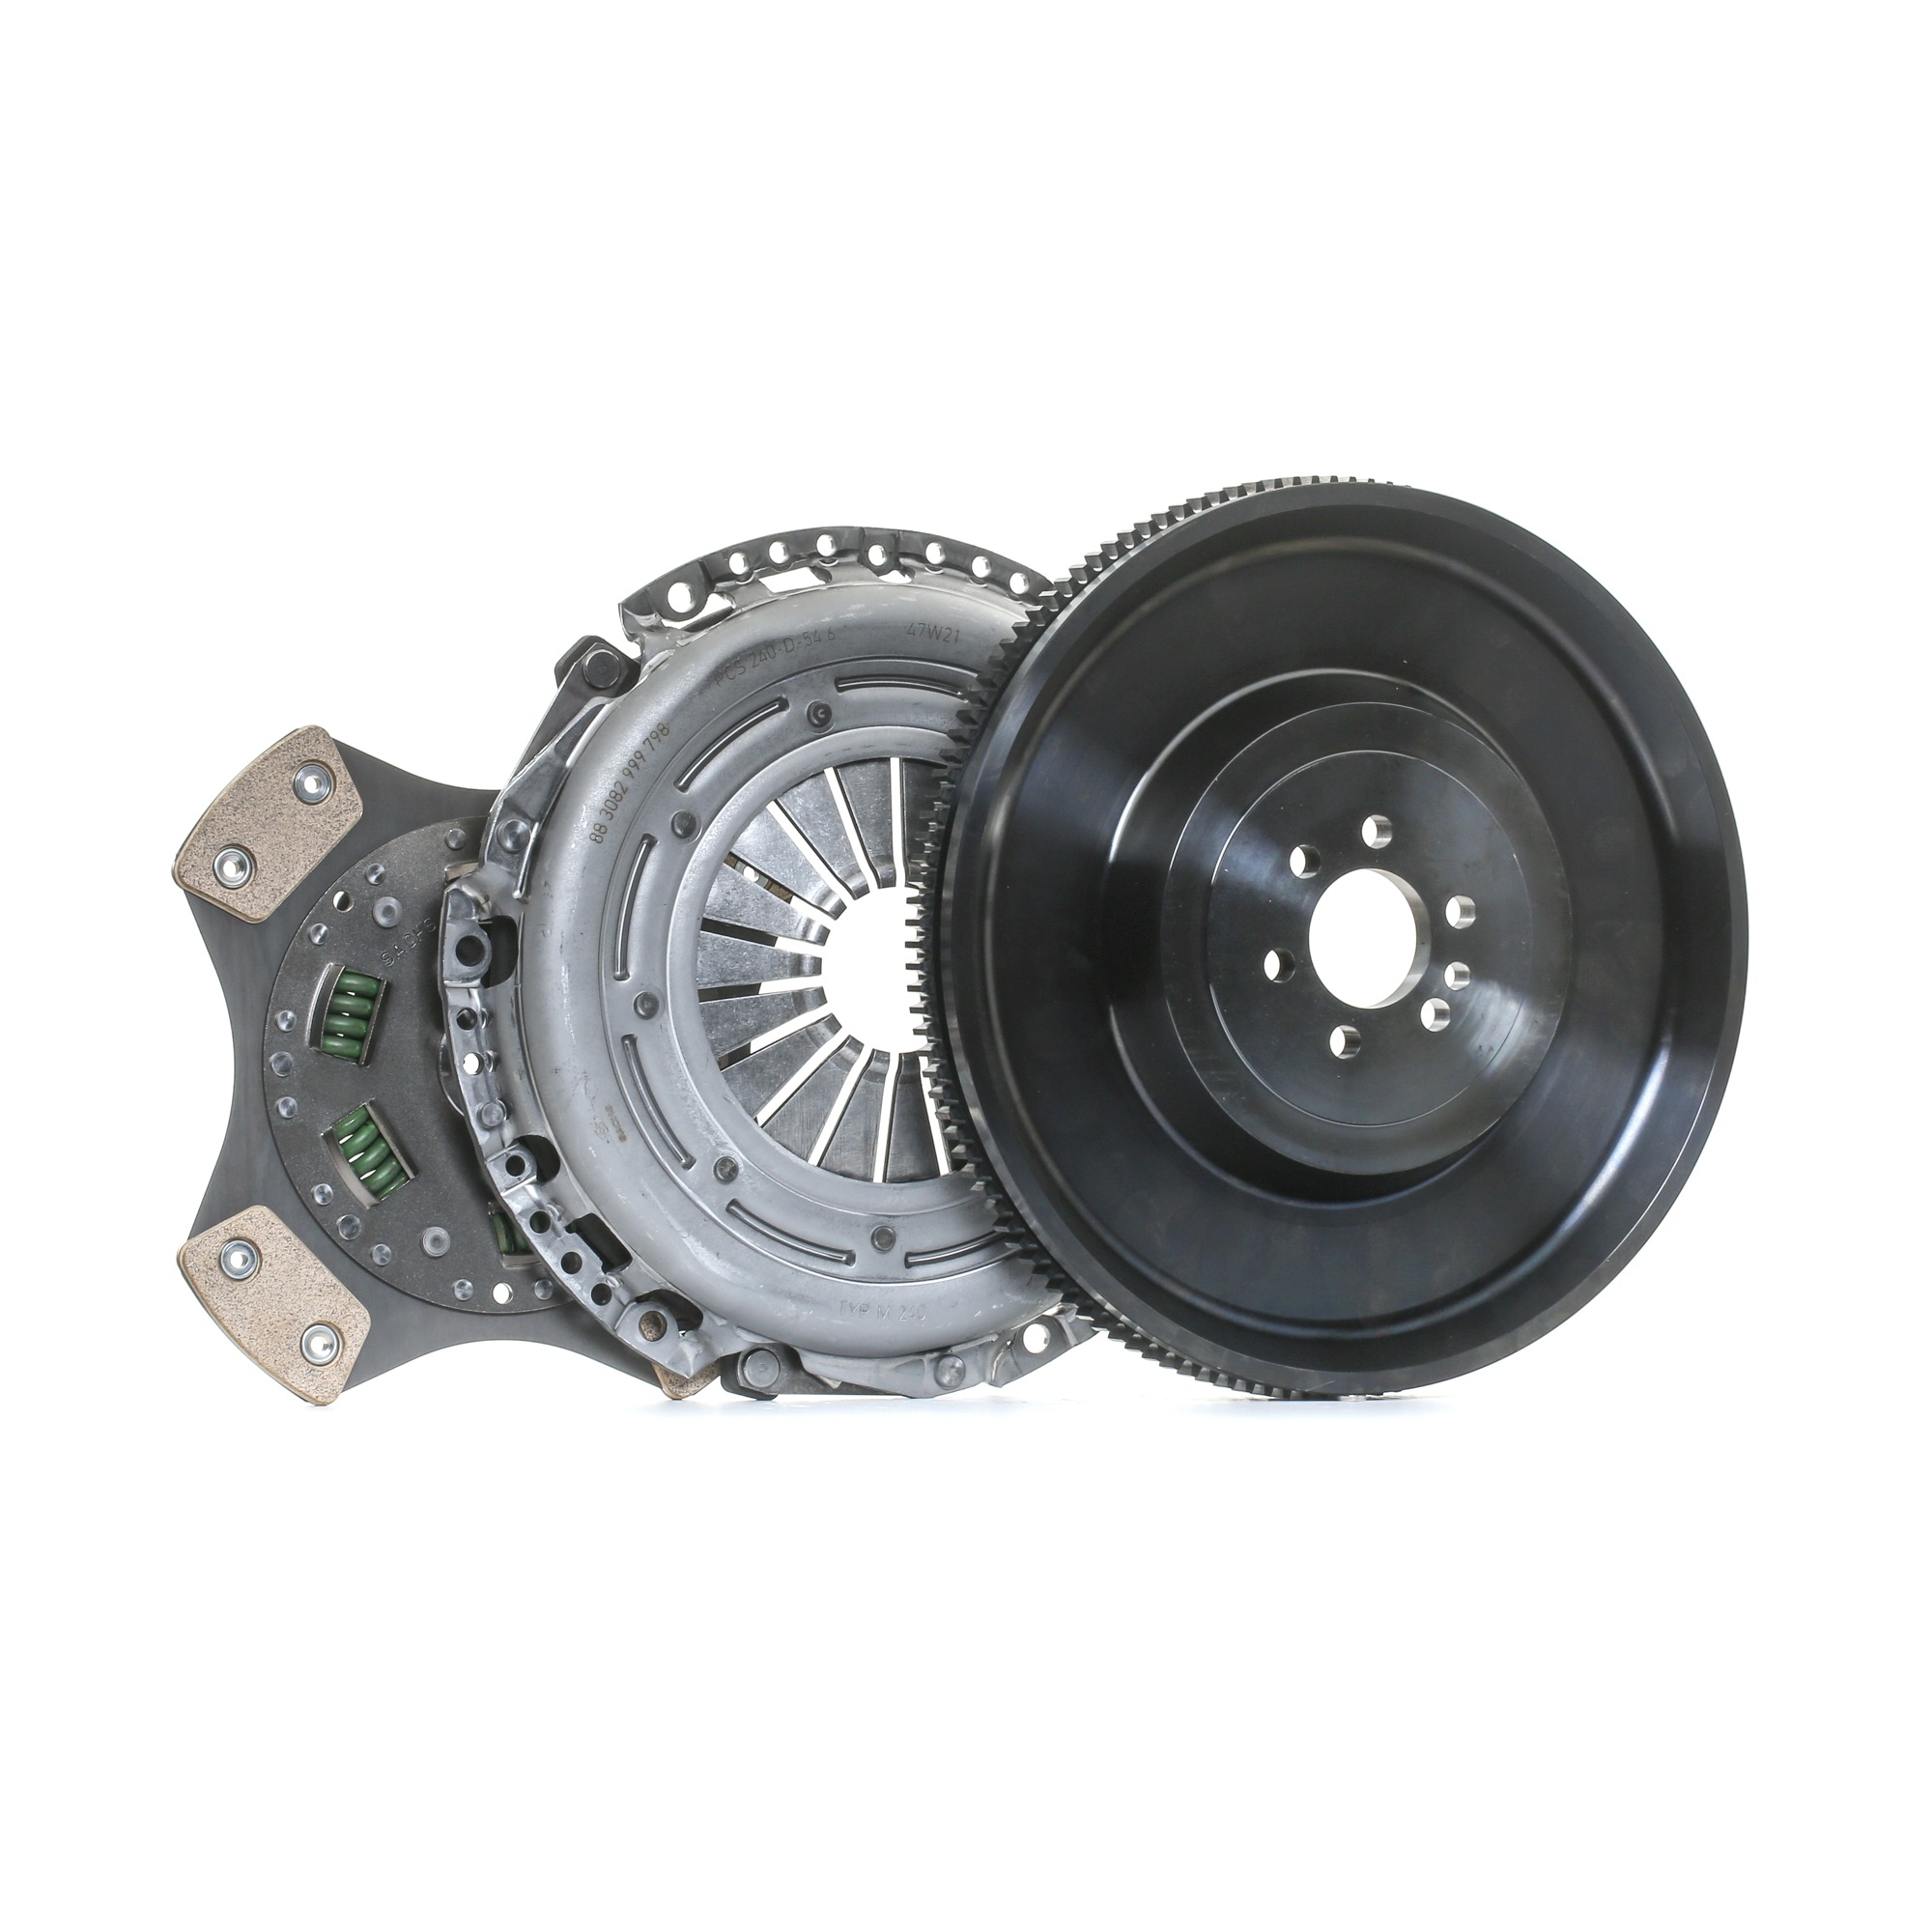 SACHS PERFORMANCE 883089 000053 Clutch kit VW experience and price